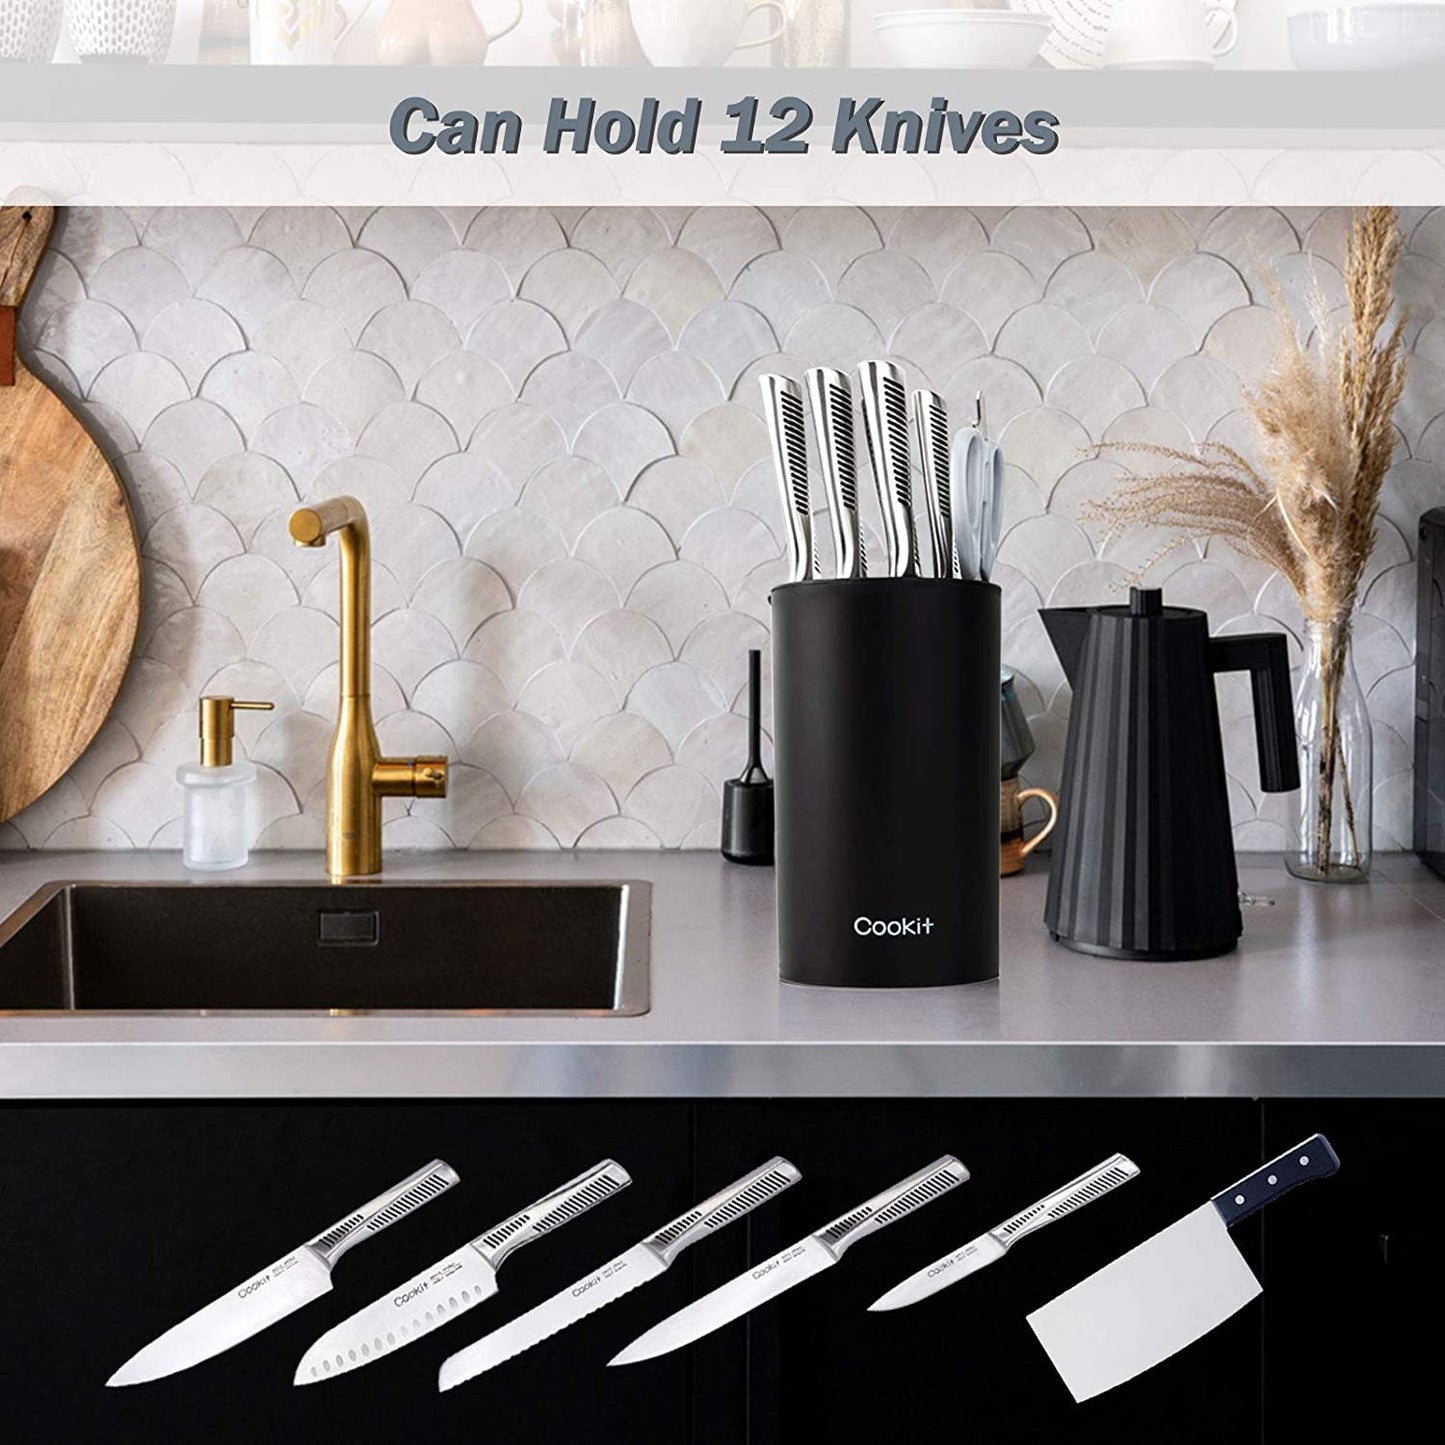 Knife Block Holder, Universal Knife Block without Knives, Unique Double-Layer Wavy Design, Round Black Knife Holder for Kitchen, Space Saver Knife Storage with Scissors Slot Amazon Platform Banned